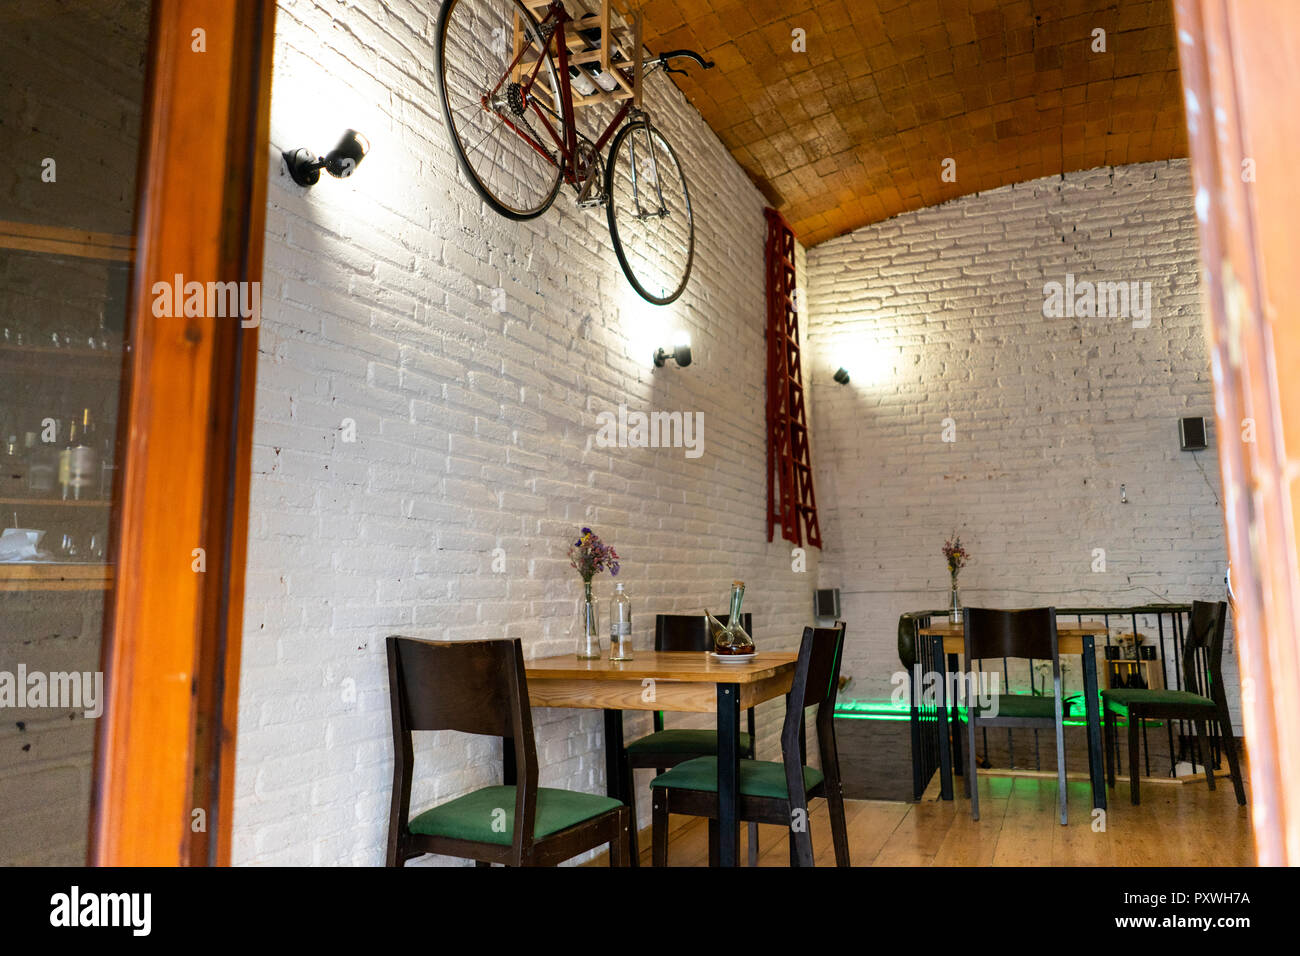 Interior of a restaurant with bicycle hanging on the wall Stock Photo